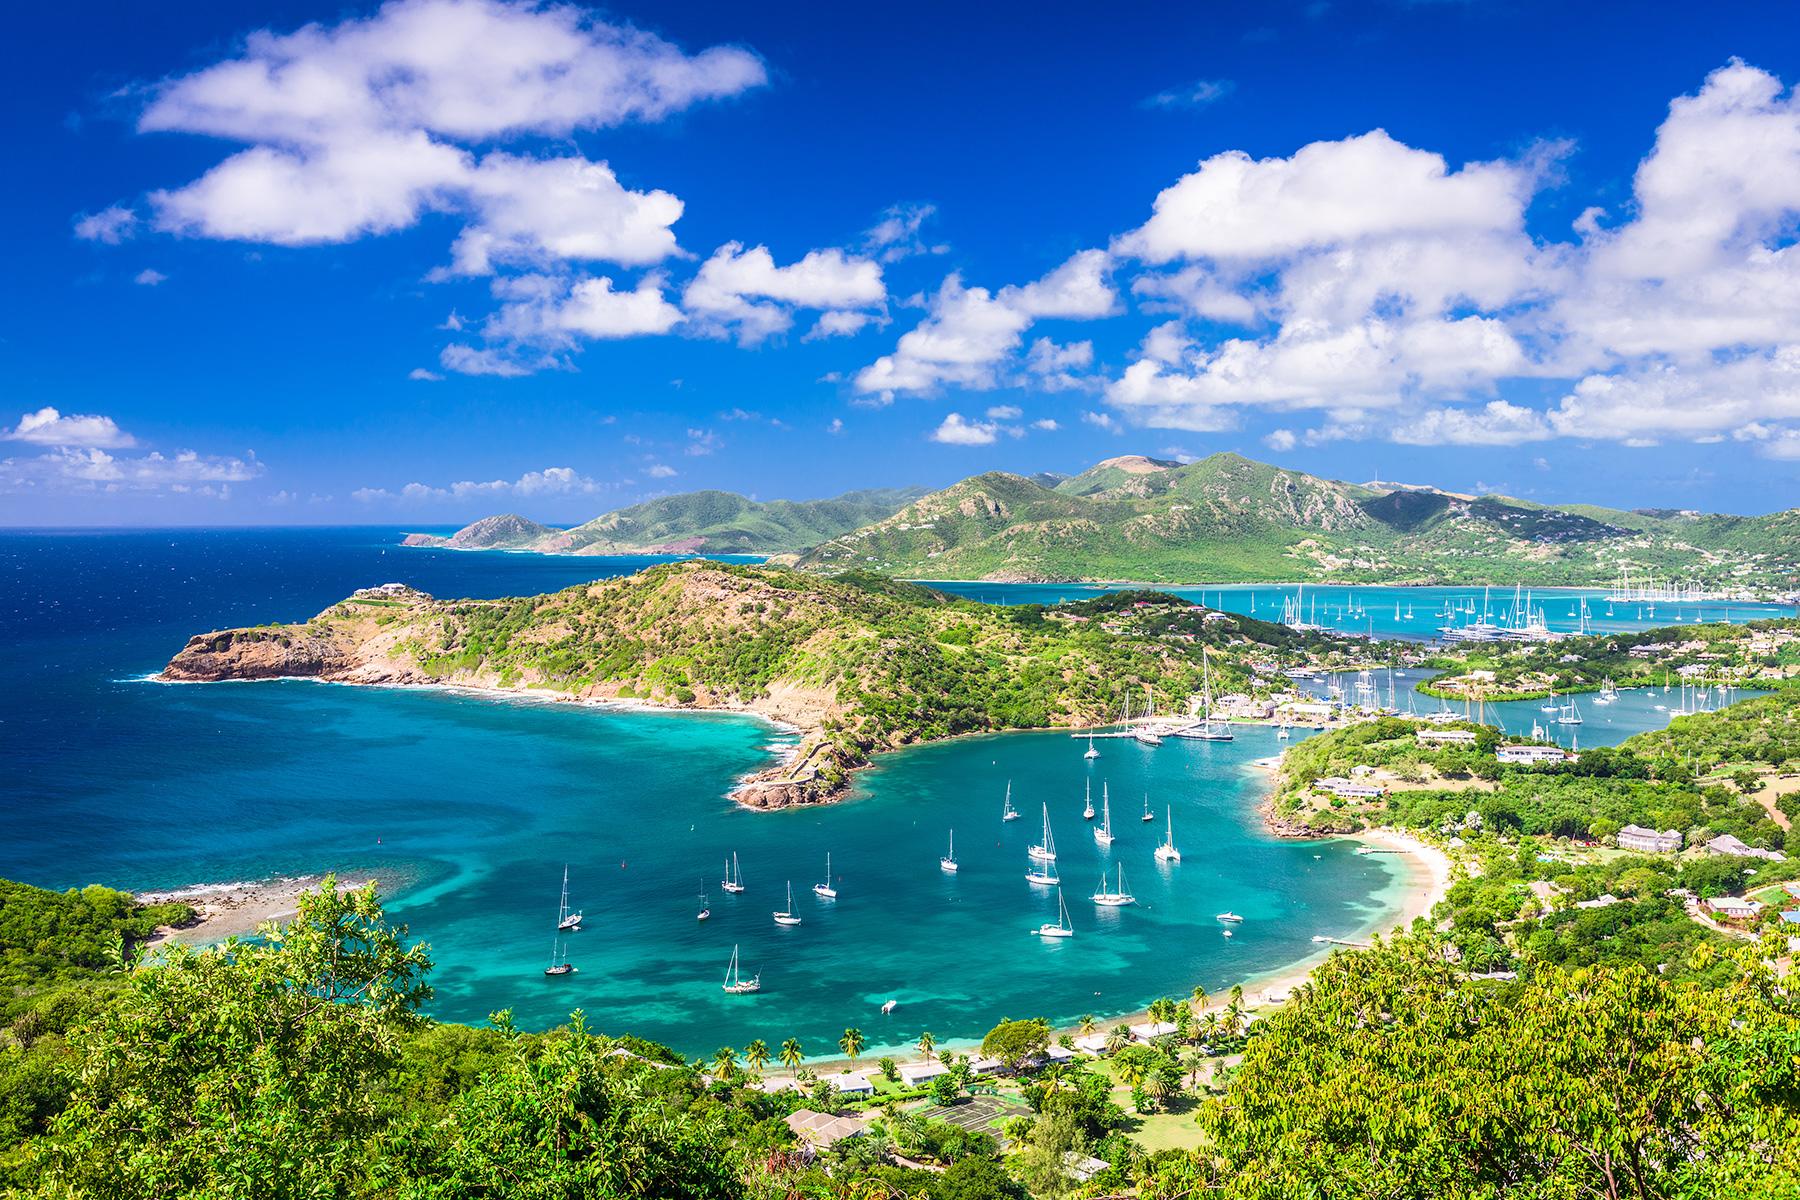 New York to Antigua Barbuda $310 RT Nonstop Airfares on American Airlines BE (Travel September - March 2023)